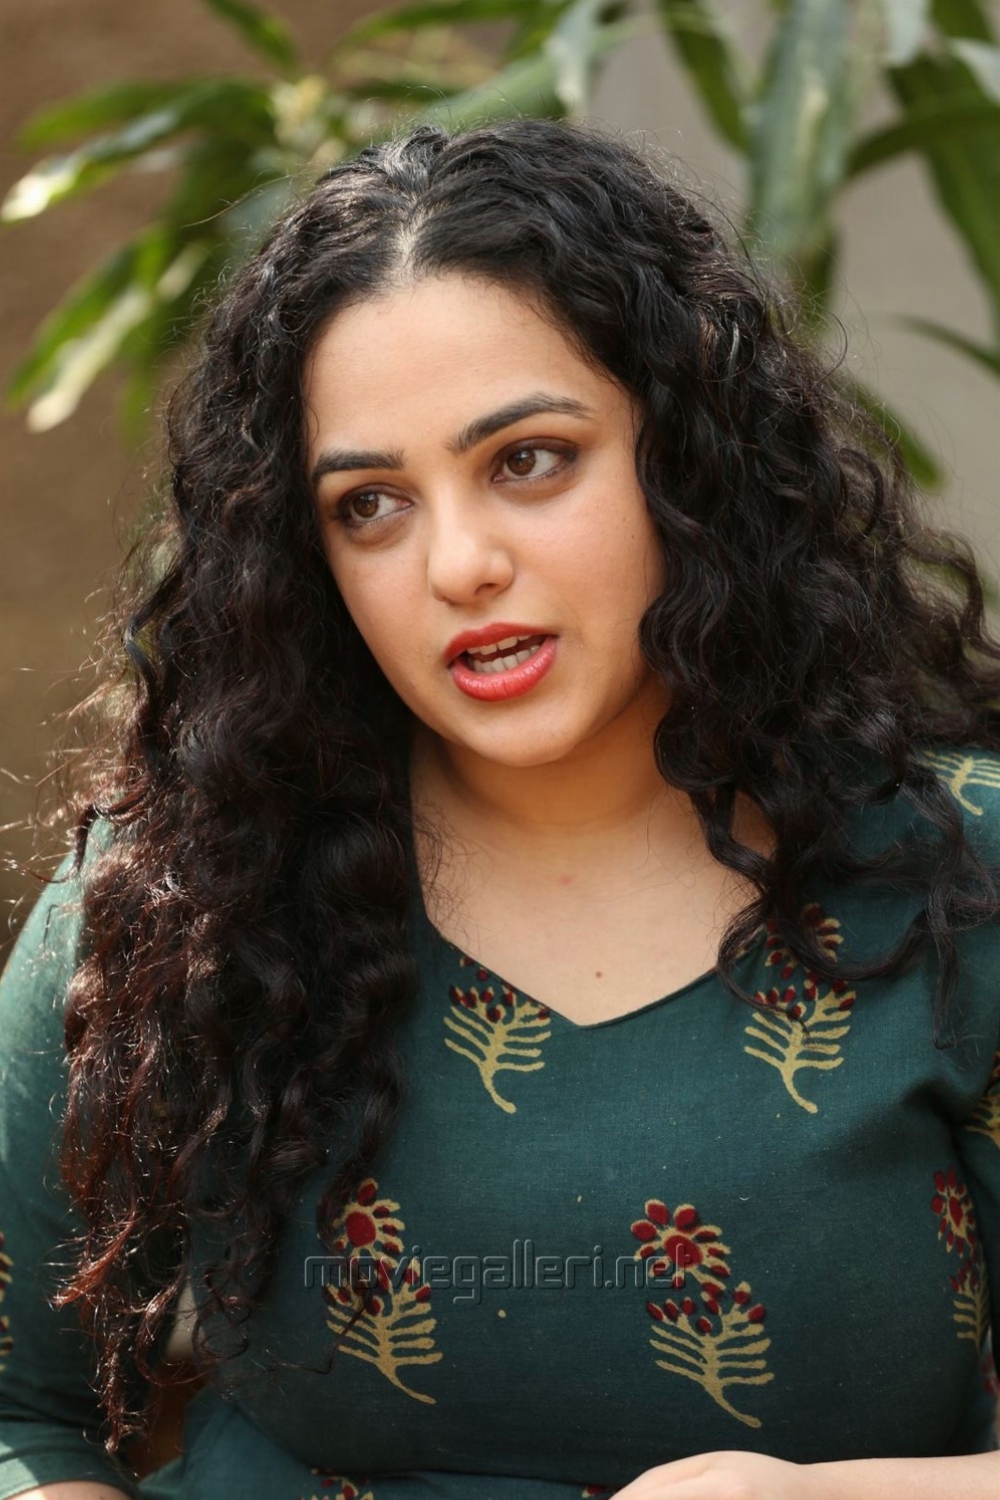 Events - Nithya Menon Special Gallery Movie Launch and Press Meet photos,  images, gallery, clips and actors actress stills - IndiaGlitz.com